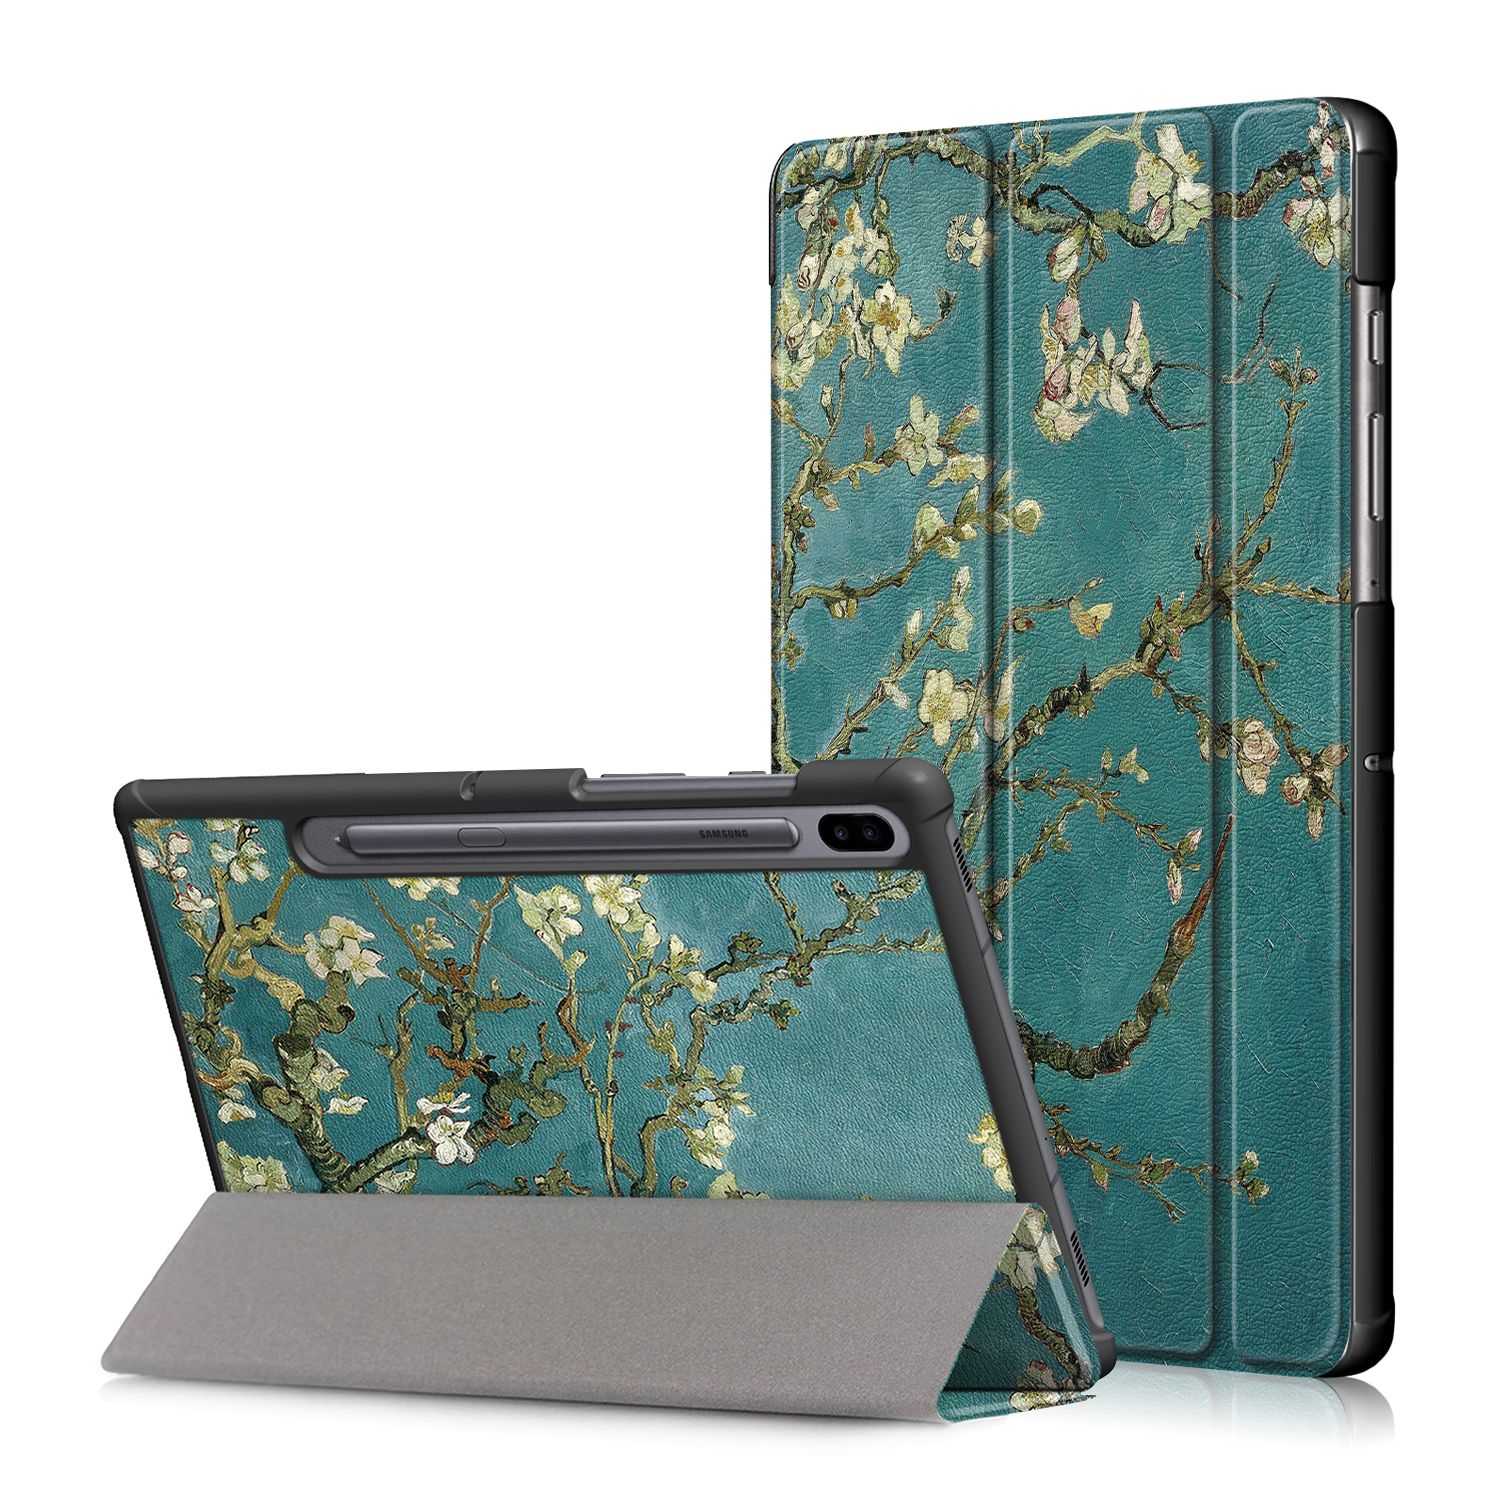 Printing-Tri-Fold-Tablet-Case-for-Samsung-Tab-S6-105---Apricot-Blossom-1556682